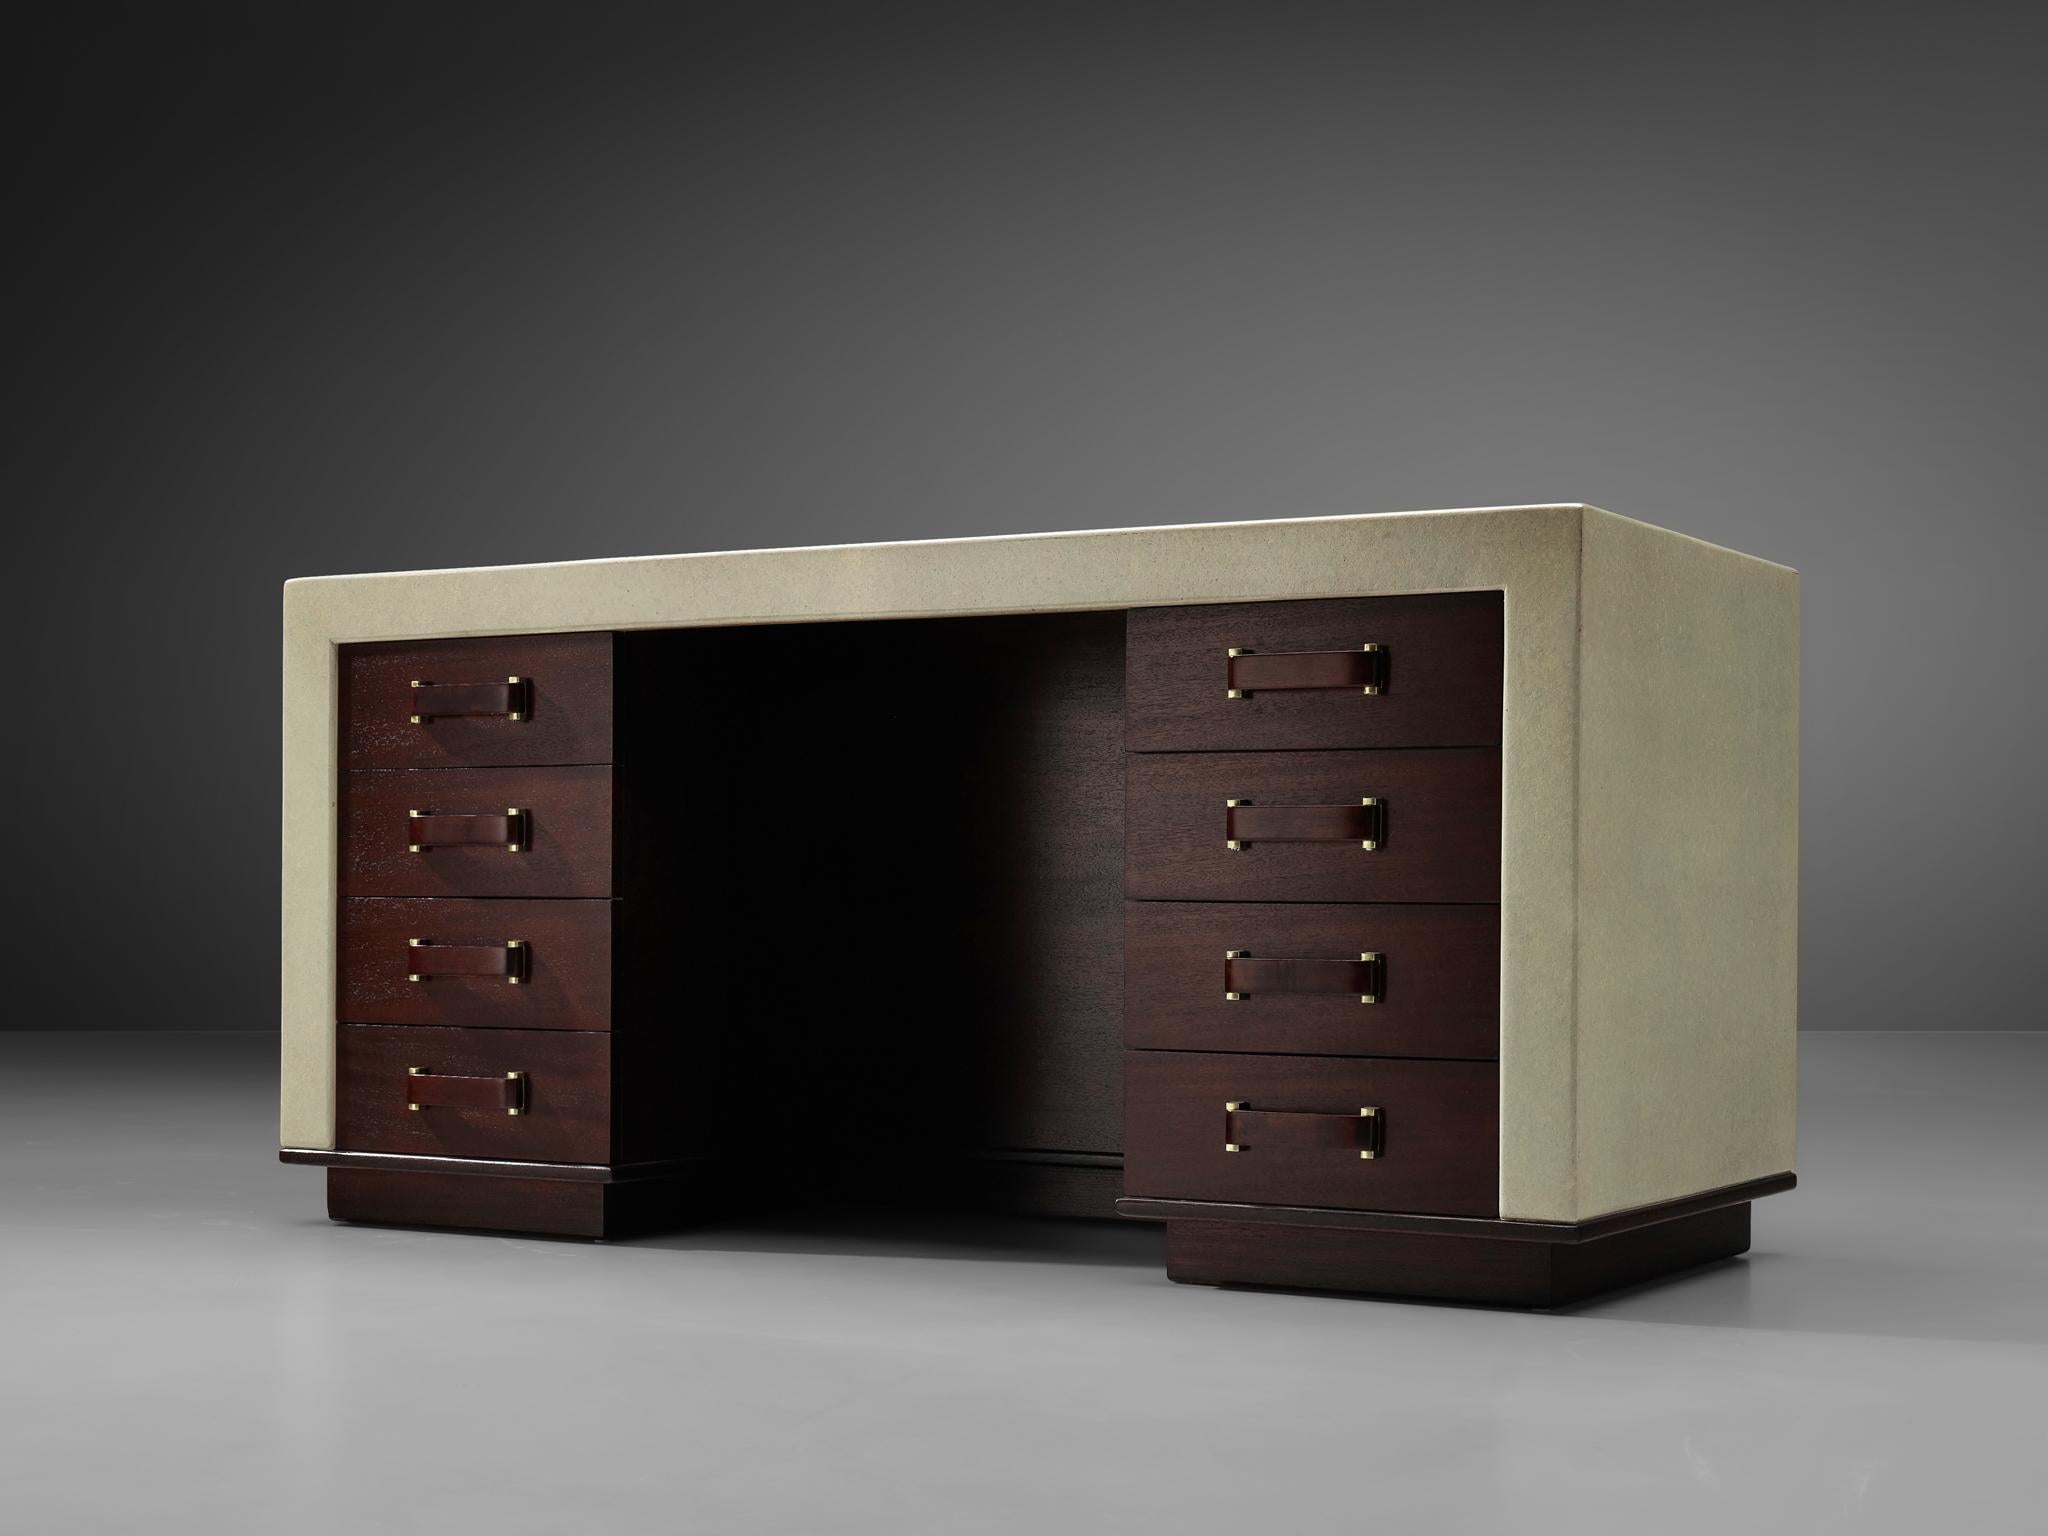 Paul Frankl for Johnson Furniture, rare free-standing desk, cork, mahogany, brass, United Stated, 1940s

Rare desk by Paul Frankl designed in the 1940s. Two compartments of drawers, a closed back and the particular use of cork make this cubic design